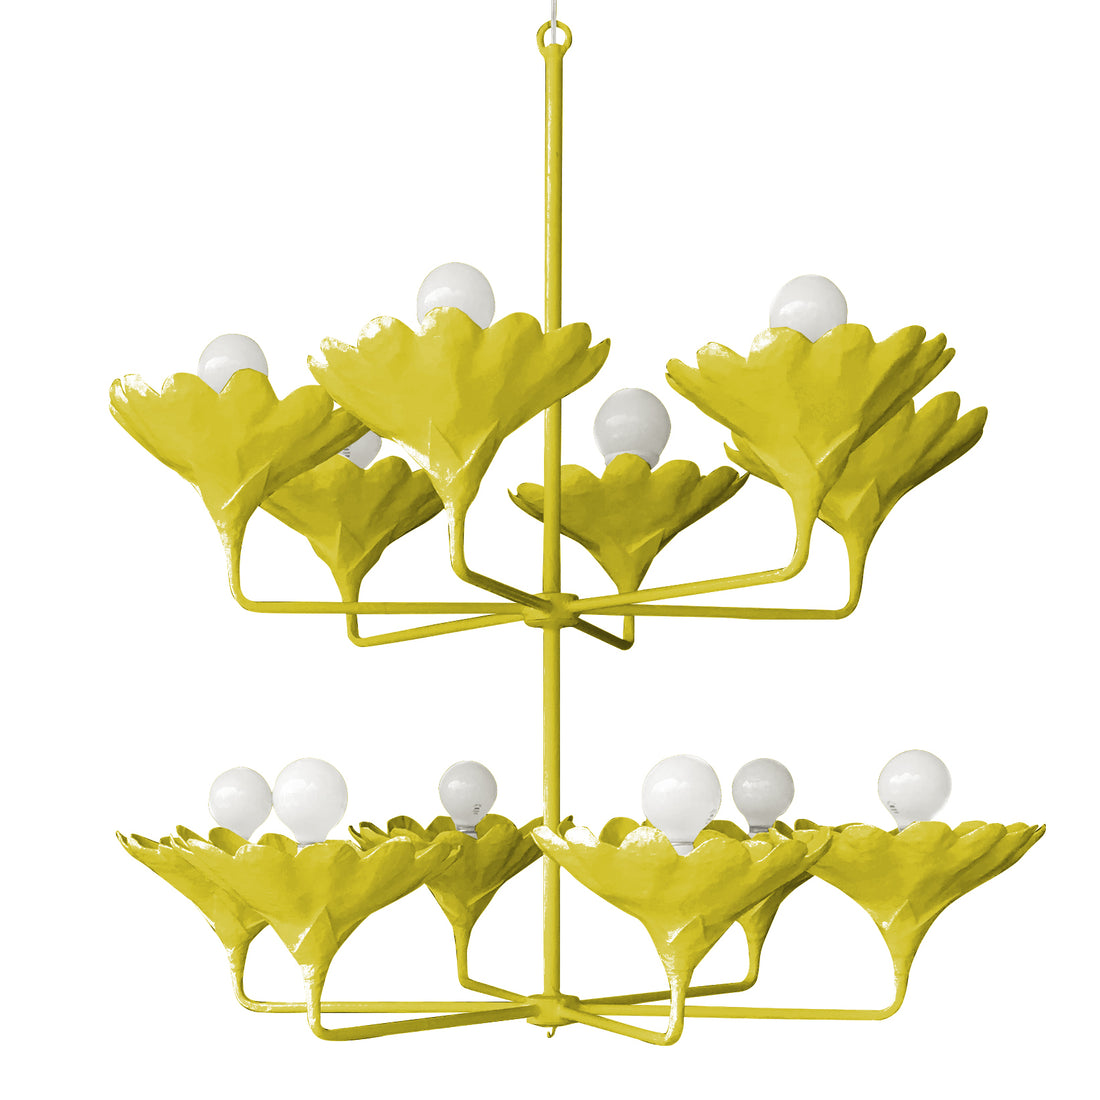 chartreuse arlo chandelier with 12 arms and flower cups. handmade.